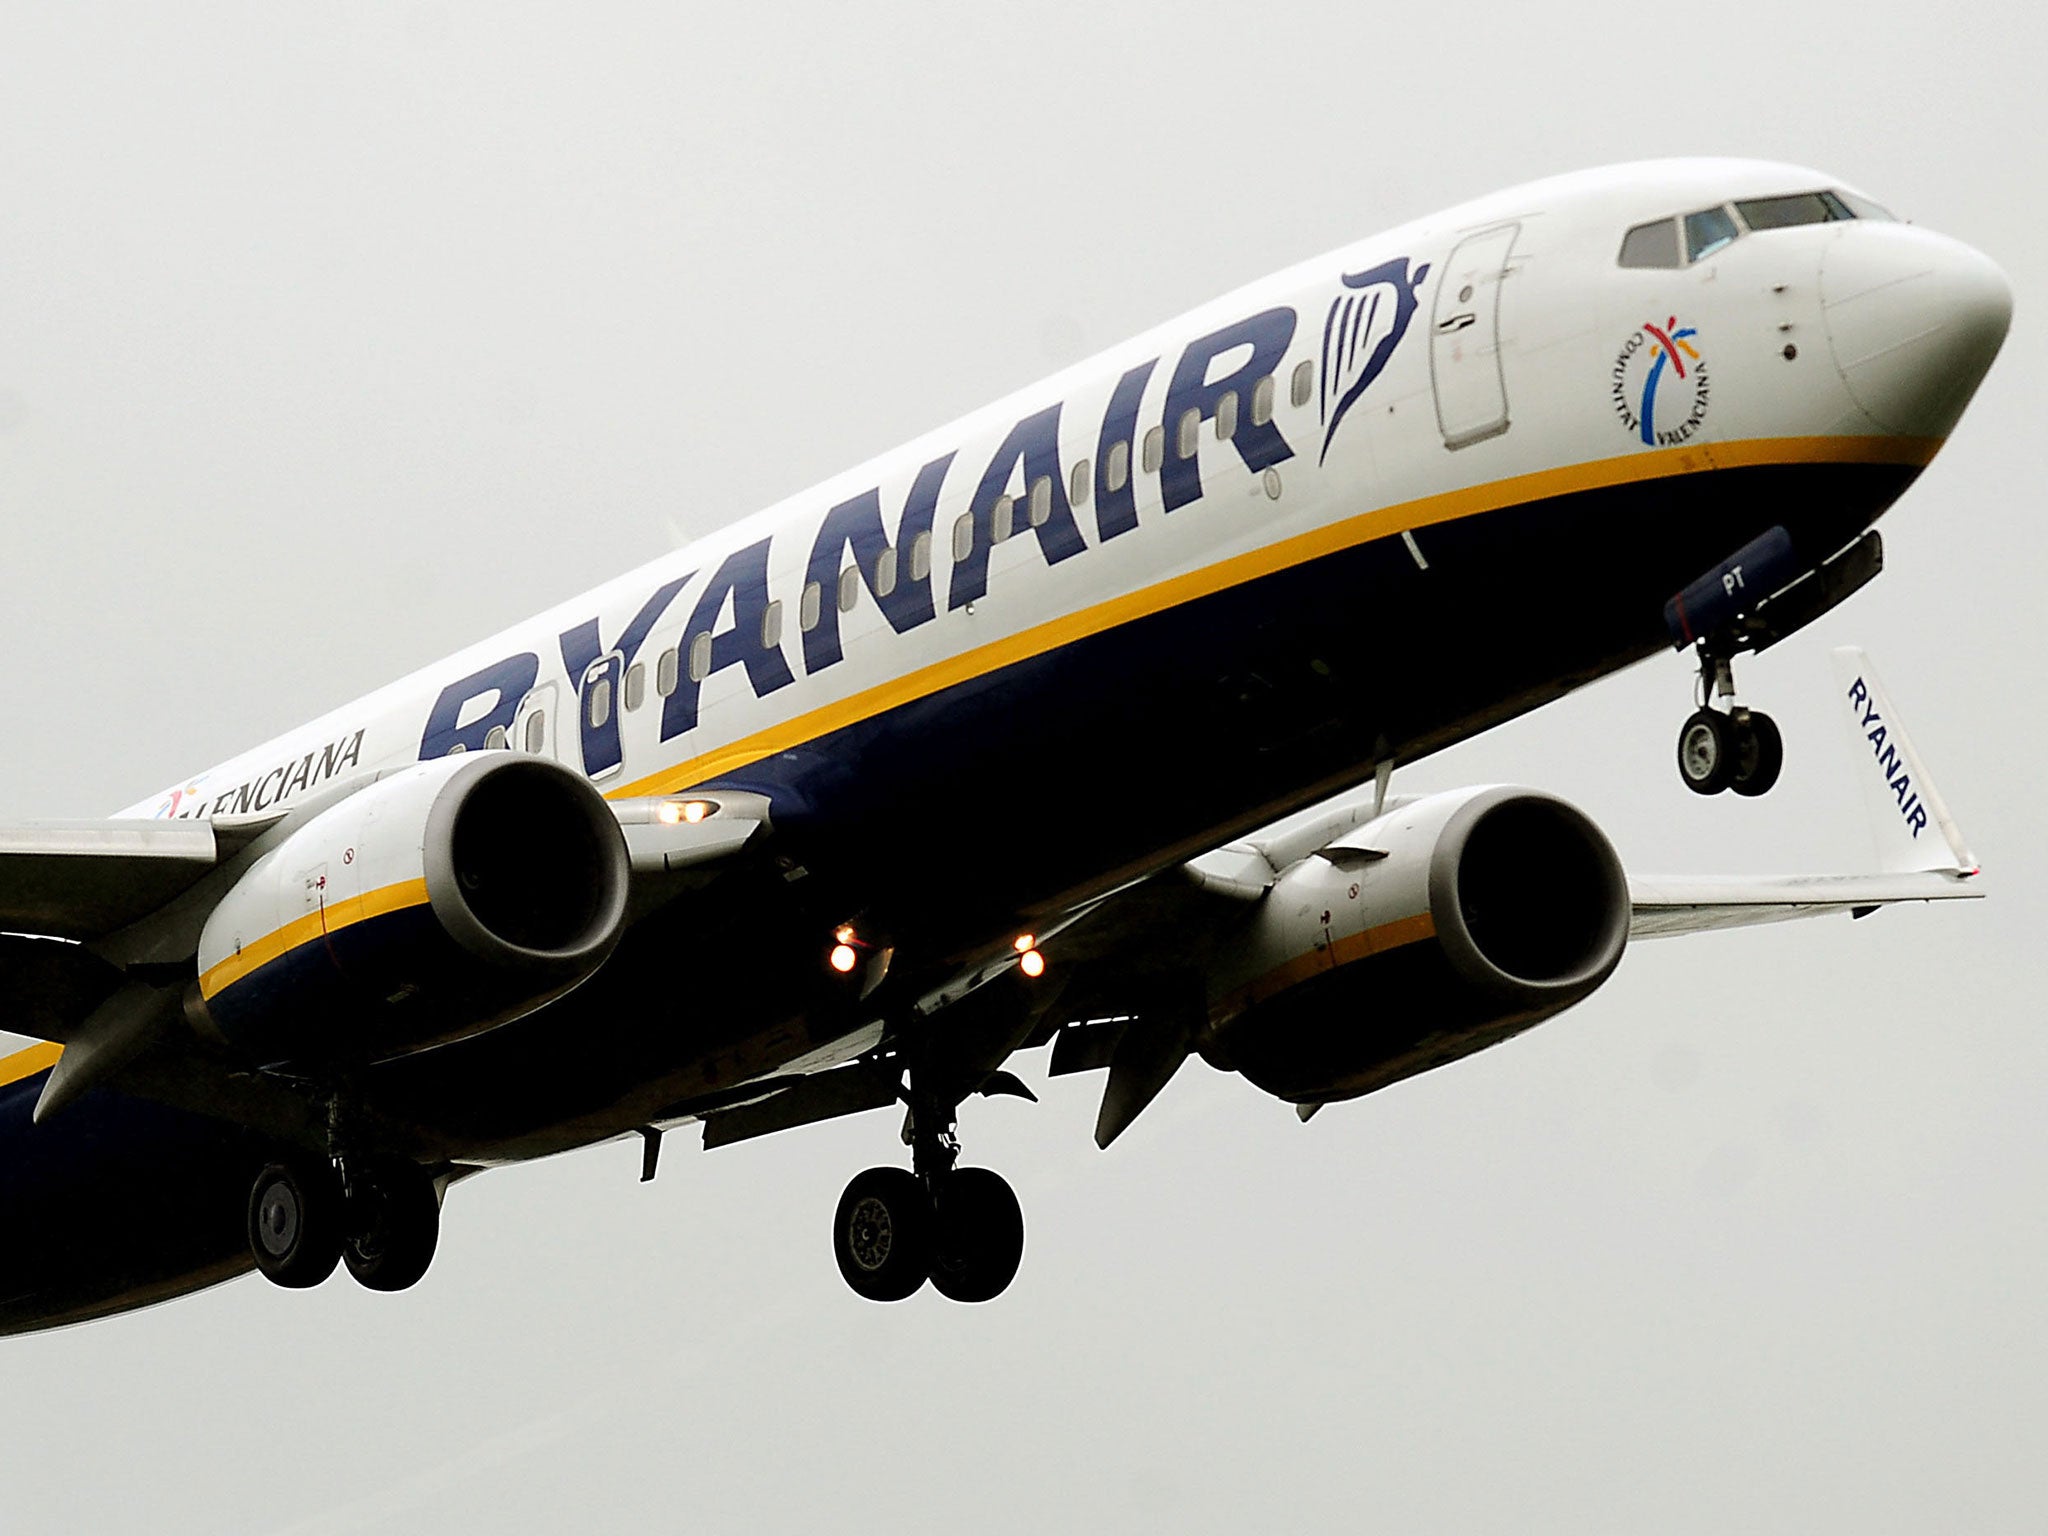 Ryanair has launched legal action in the Irish Court in December against Google and travel website eDreams